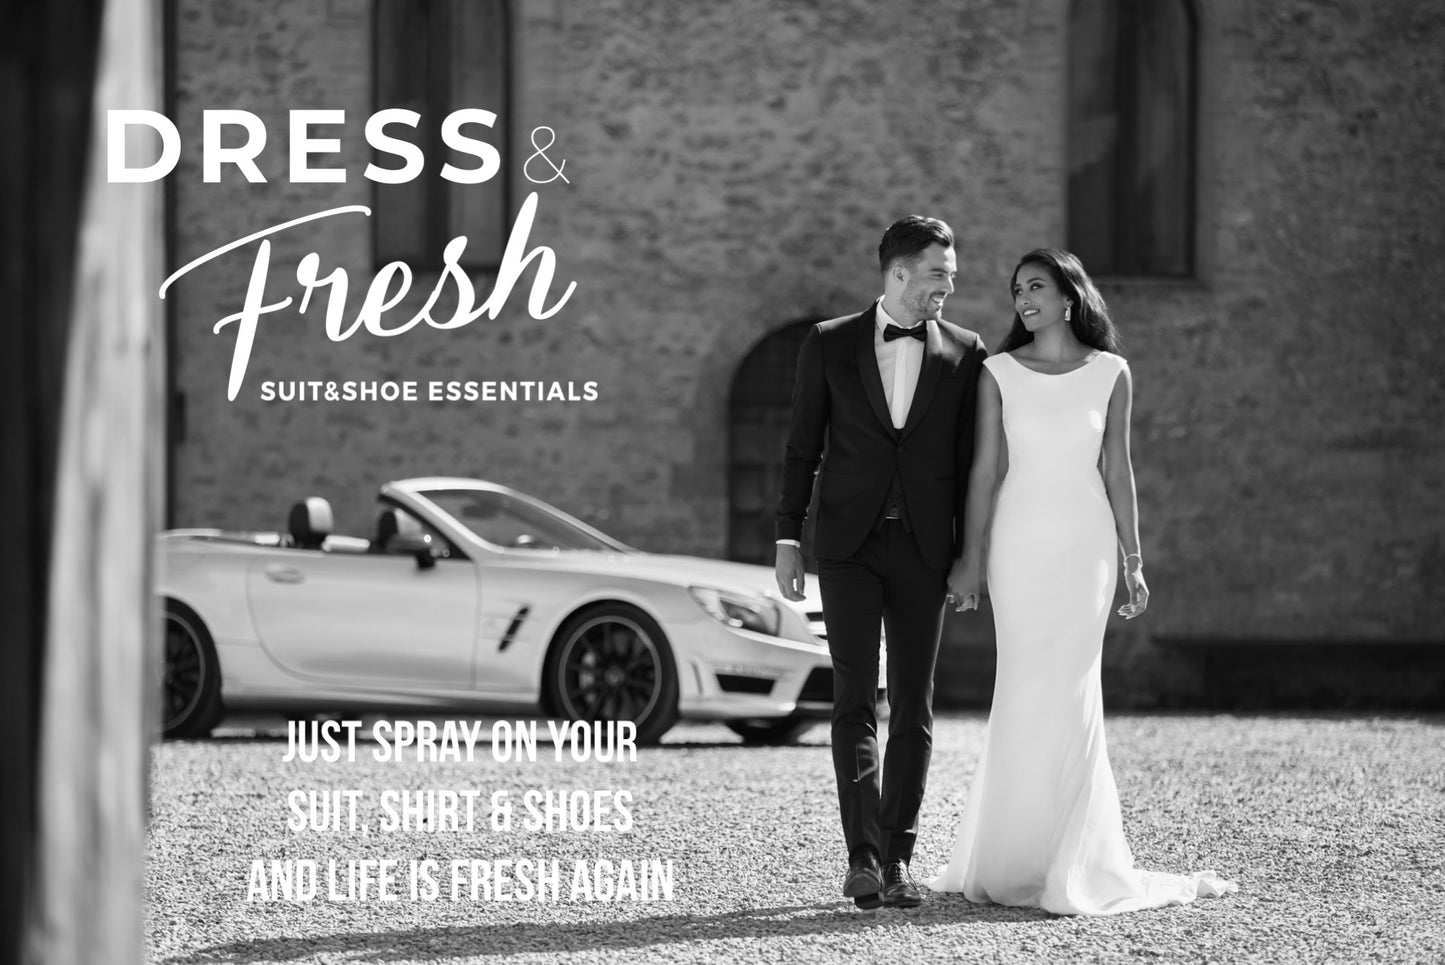 Dress & Fresh Suit and Shoe essentials